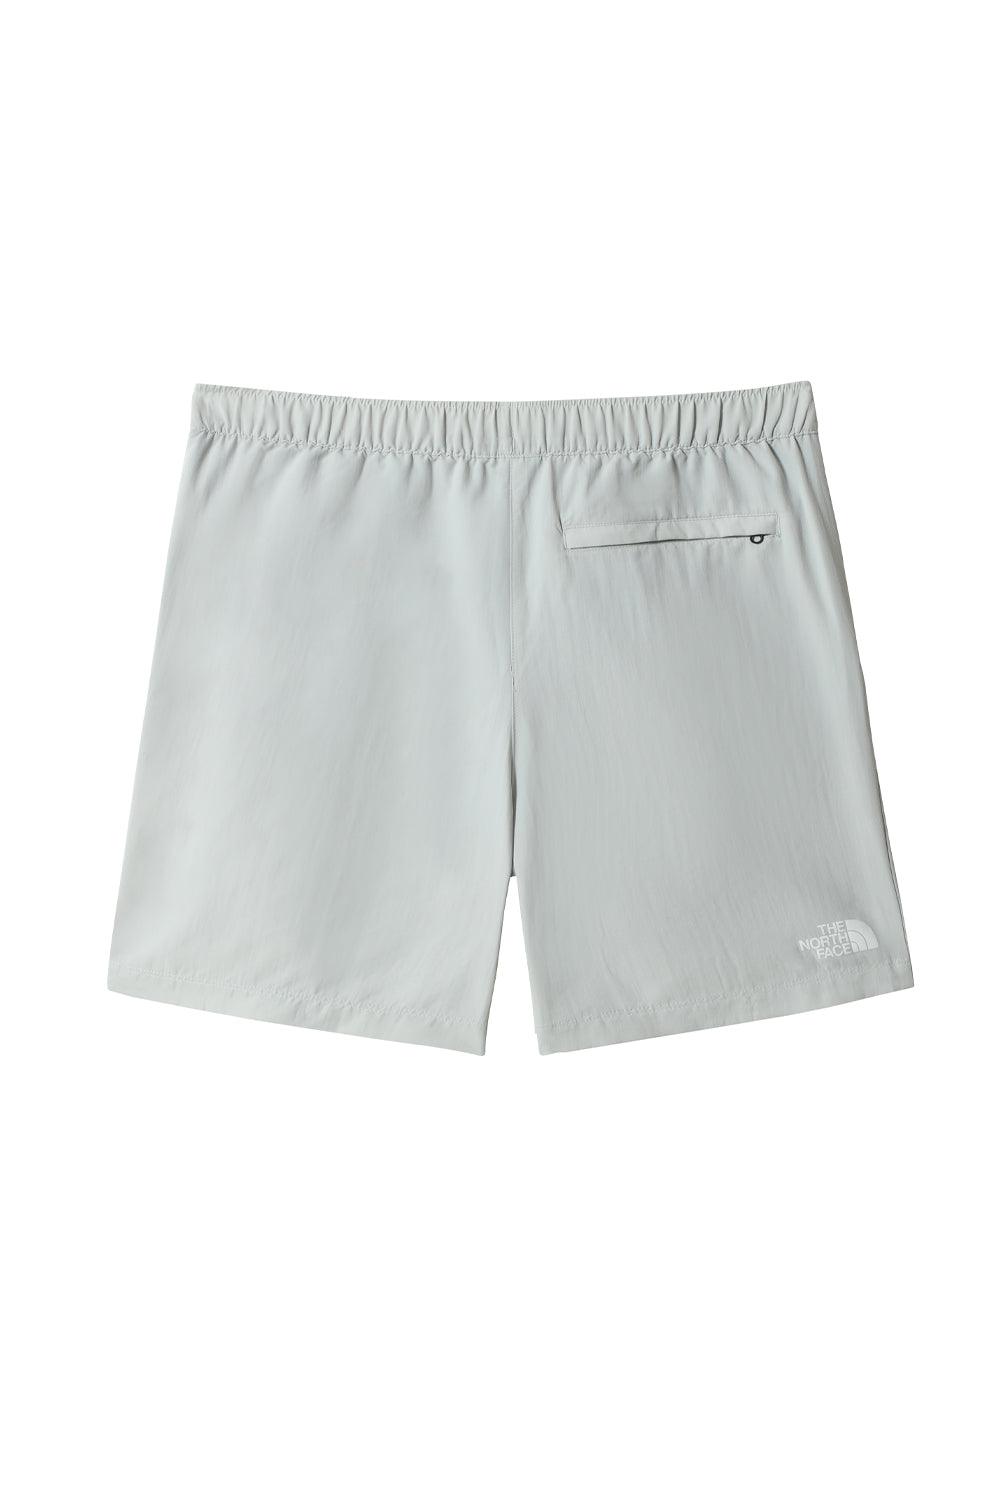 The North Face | Water Short Tin Grey 1 | Milagron